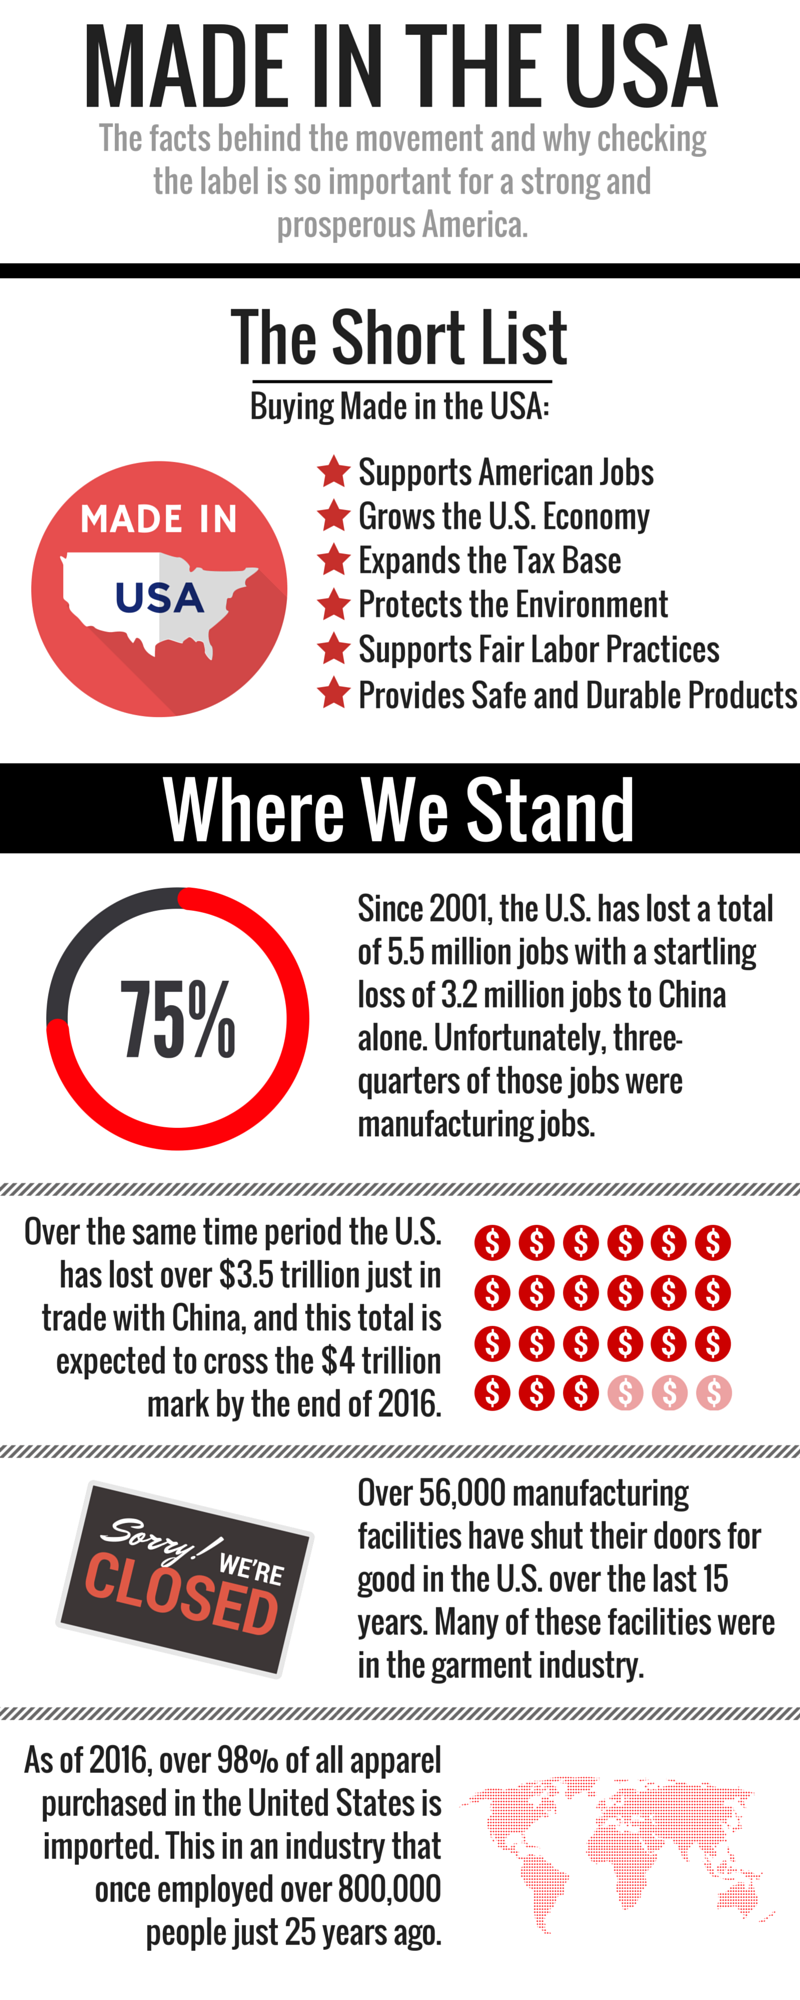 Made in the USA - The facts behind the movement. Where we stand ecnomically and how global trade has impacted our domestic economy.